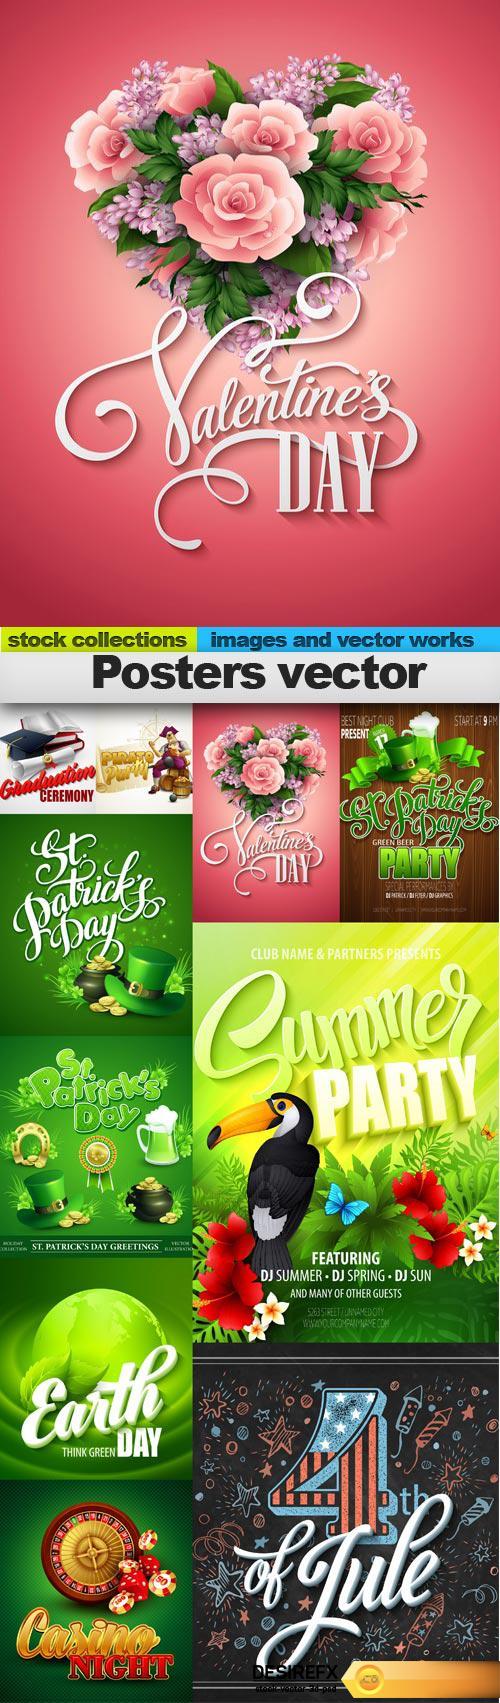 Posters vector, 10 x EPS